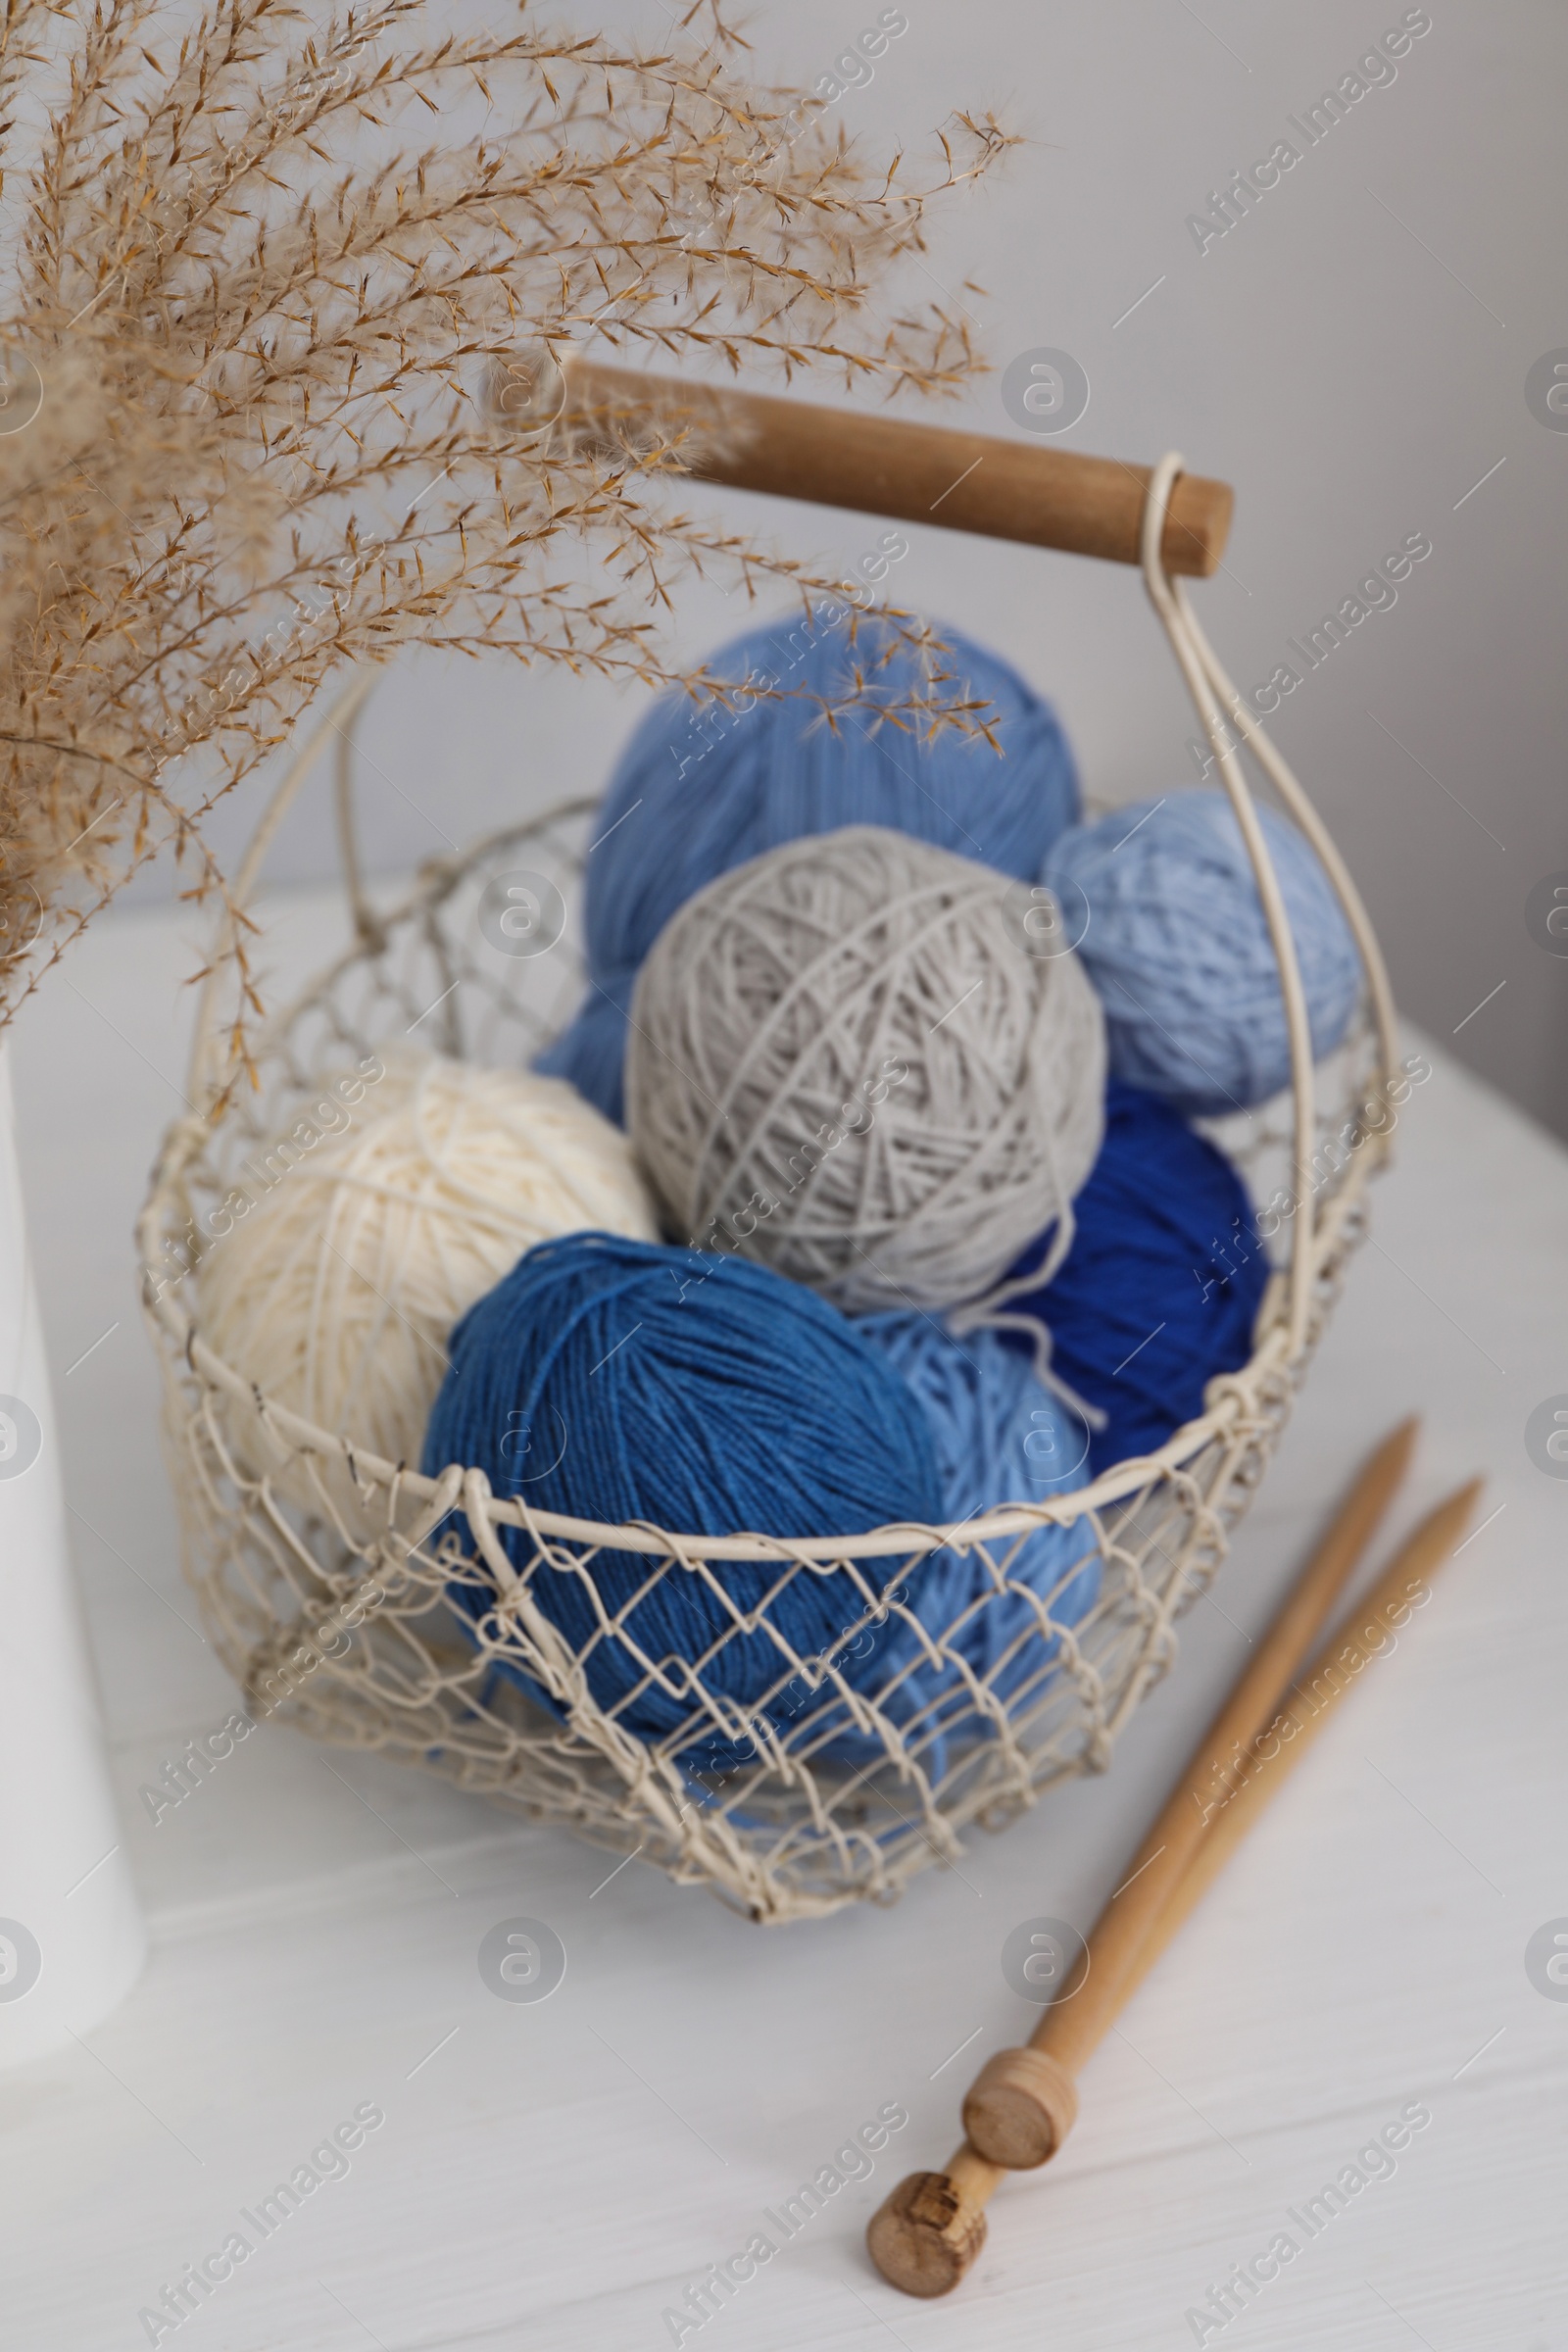 Photo of Woolen yarns in basket and knitting needles on white wooden table